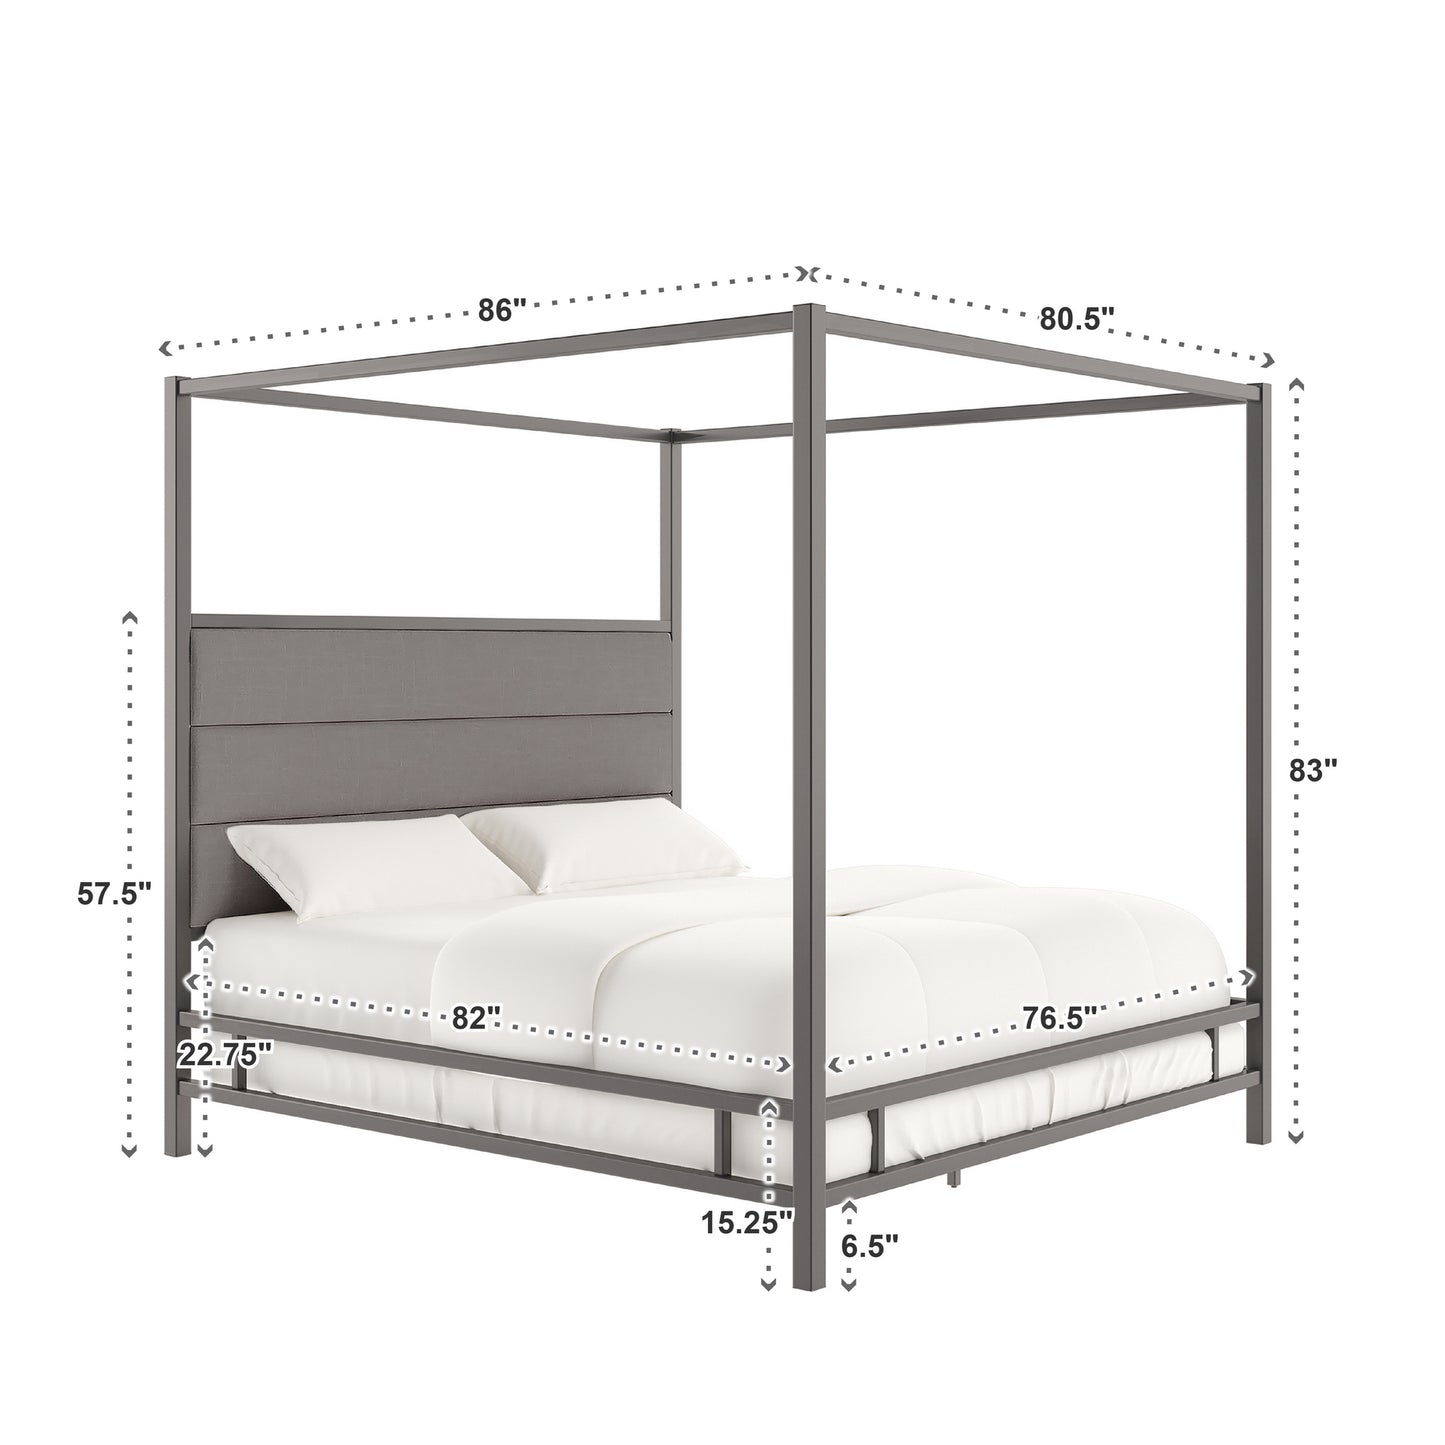 Metal Canopy Bed with Upholstered Headboard - Grey Linen, Black Nickel Finish, King Size